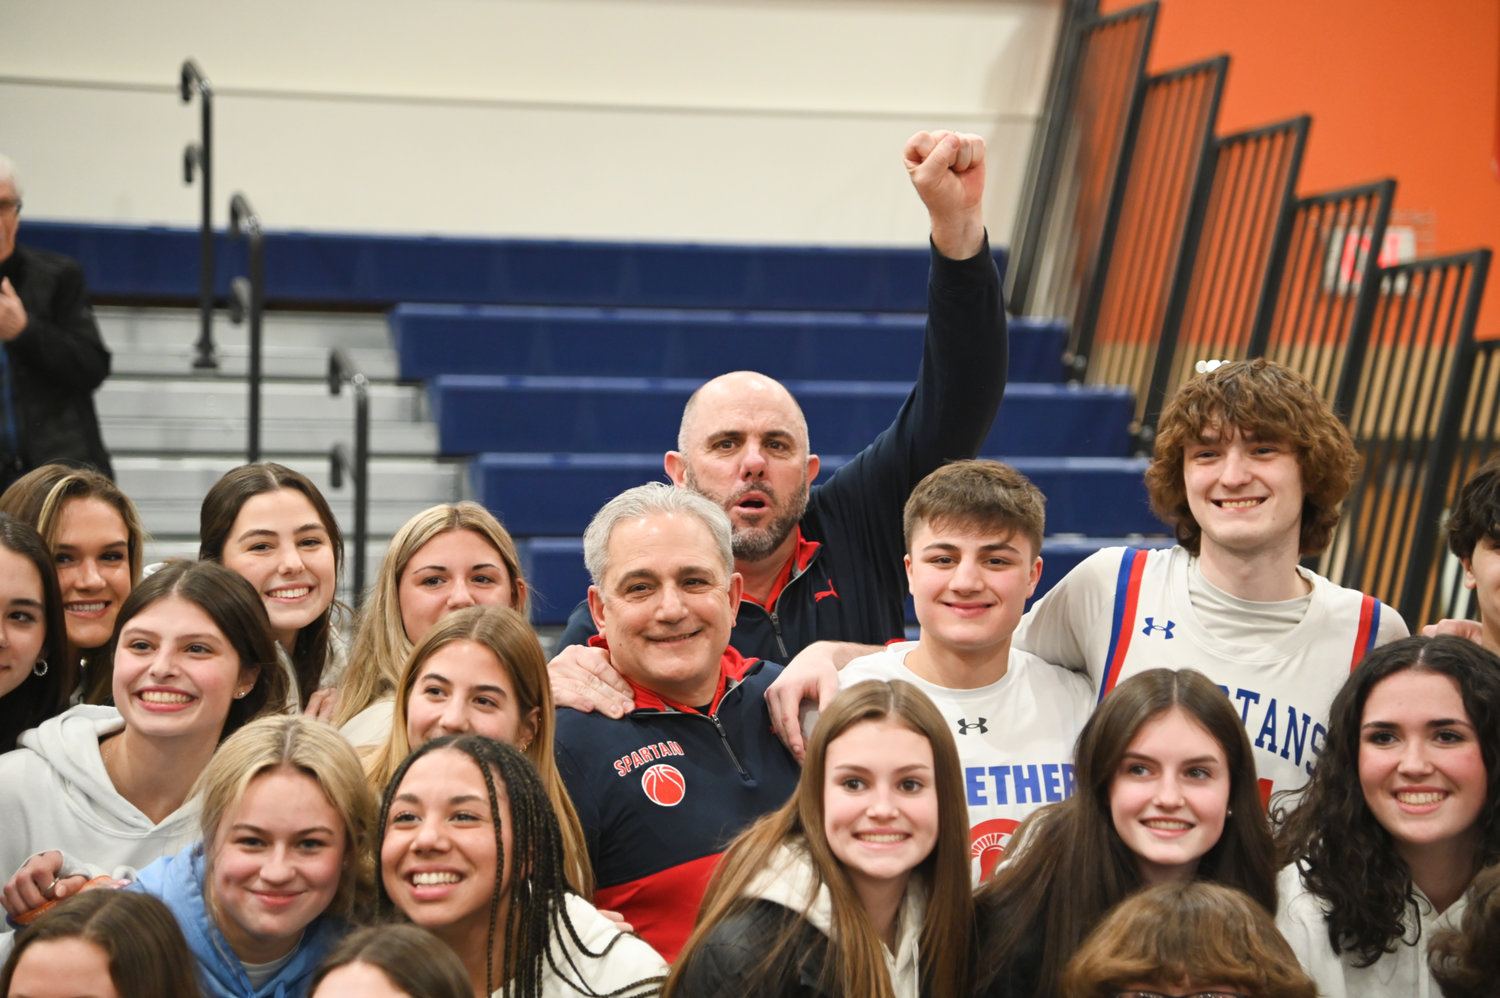 New Hartford coach John Randall (center) celebrates with his team and fans on Wednesday following the team's 69-60 win over Troy in the state Class A subregional game at Liverpool High School. It is the second time in as many seasons Randall has helped guide the Spartans to the state tournament.